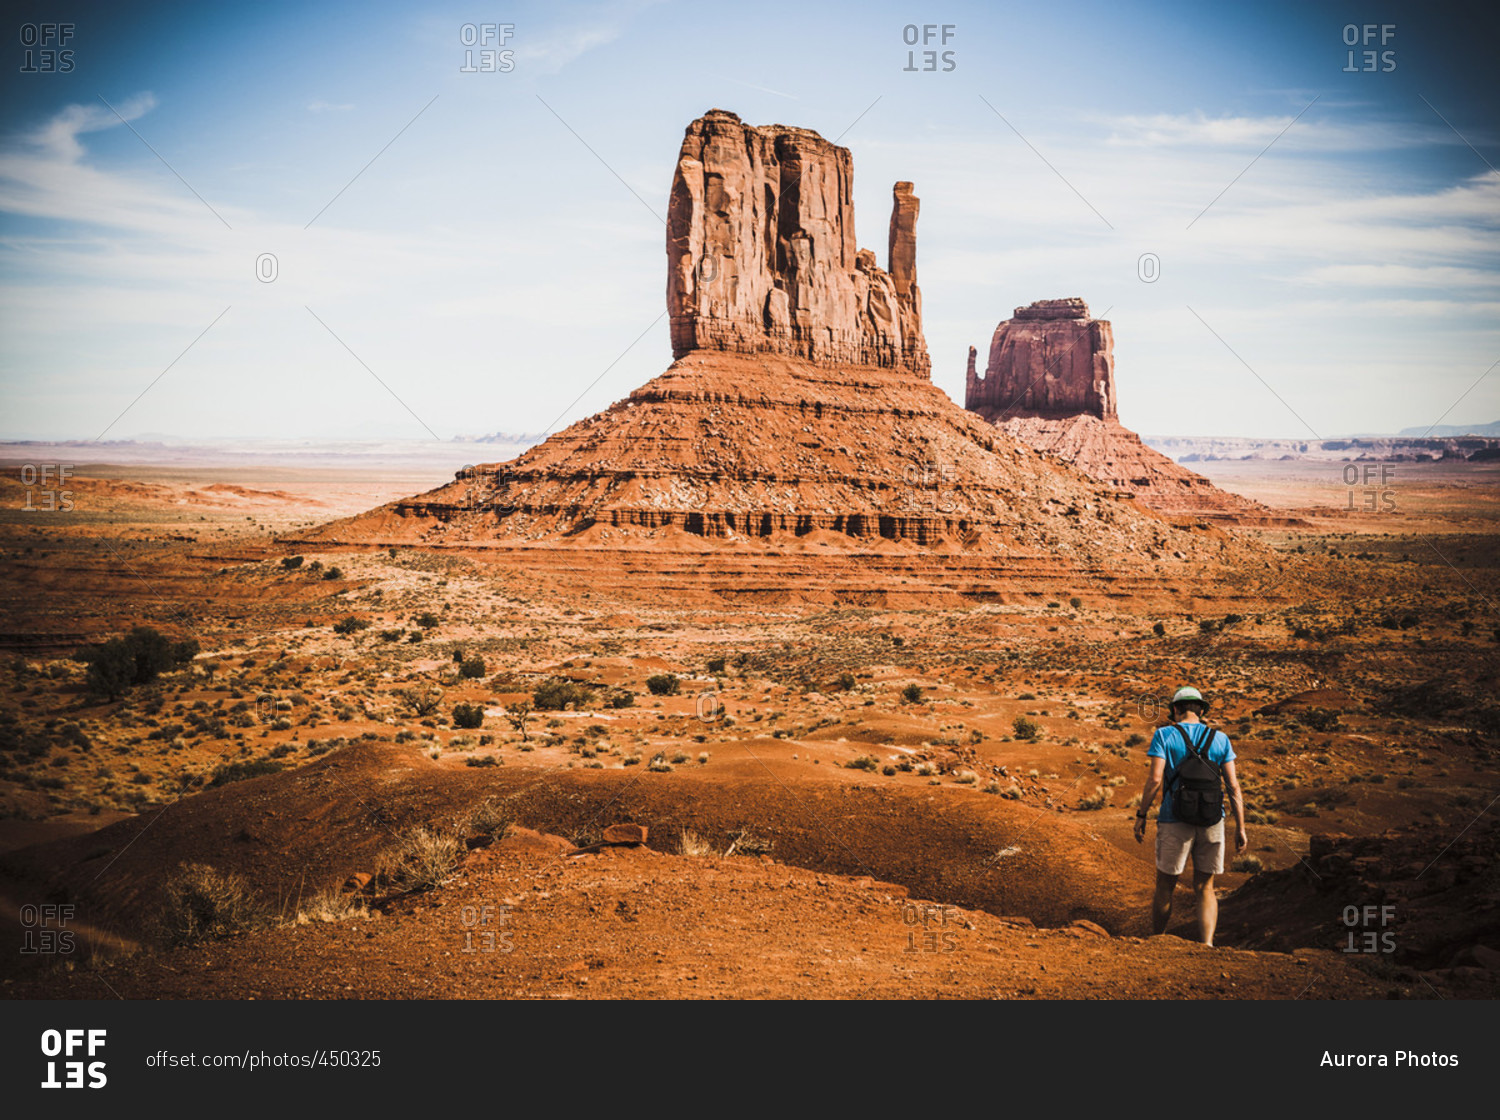 A hiker in Monument Valley